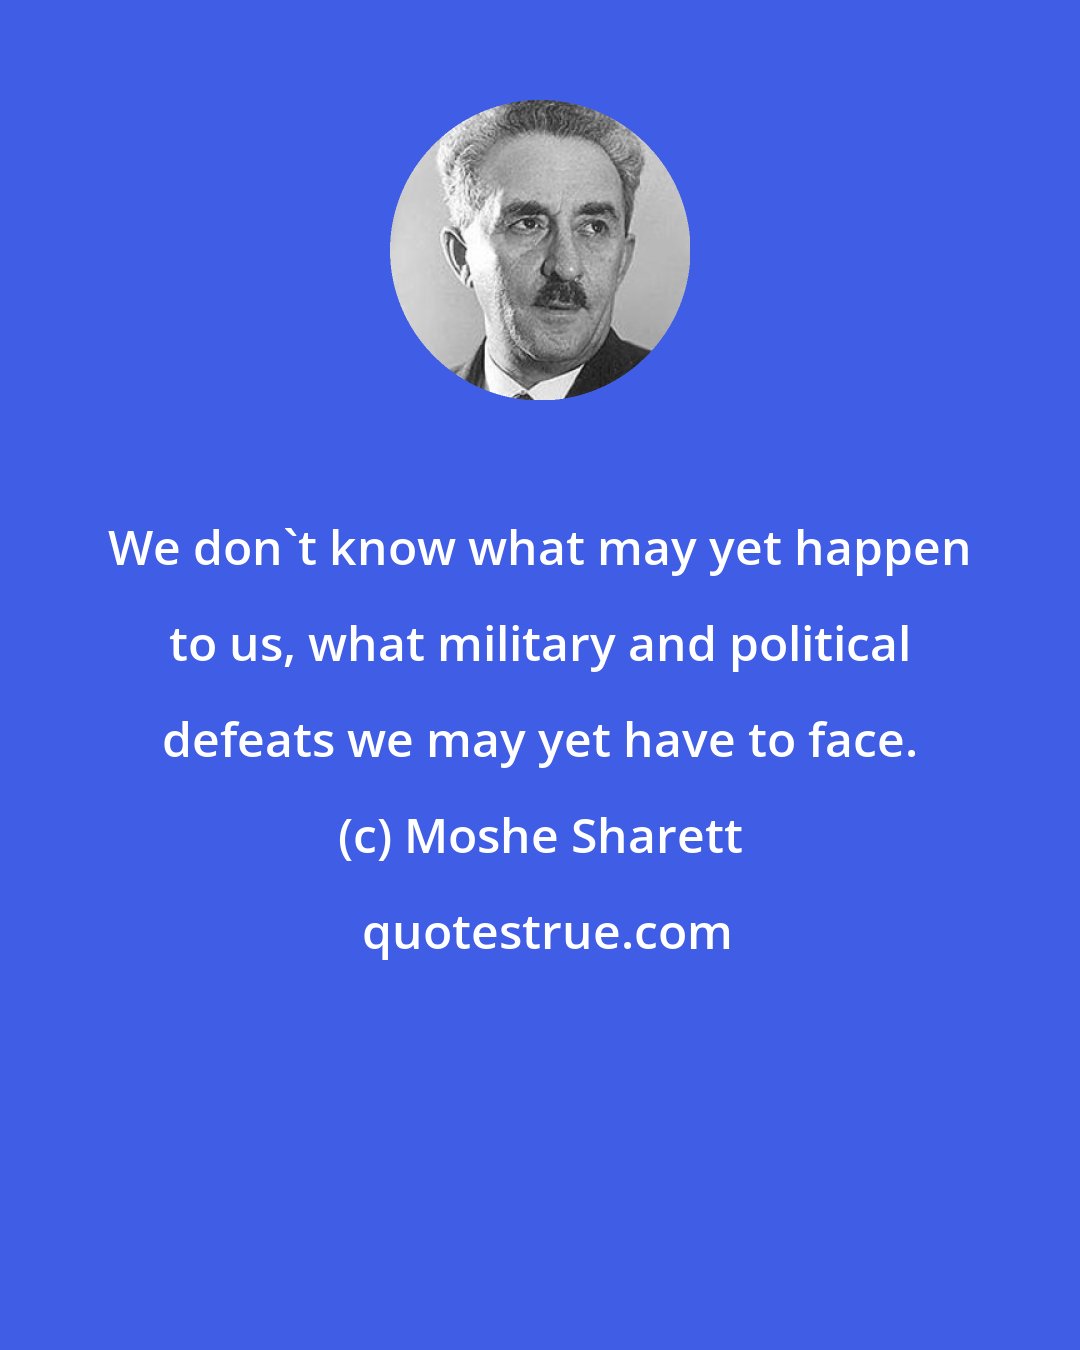 Moshe Sharett: We don't know what may yet happen to us, what military and political defeats we may yet have to face.